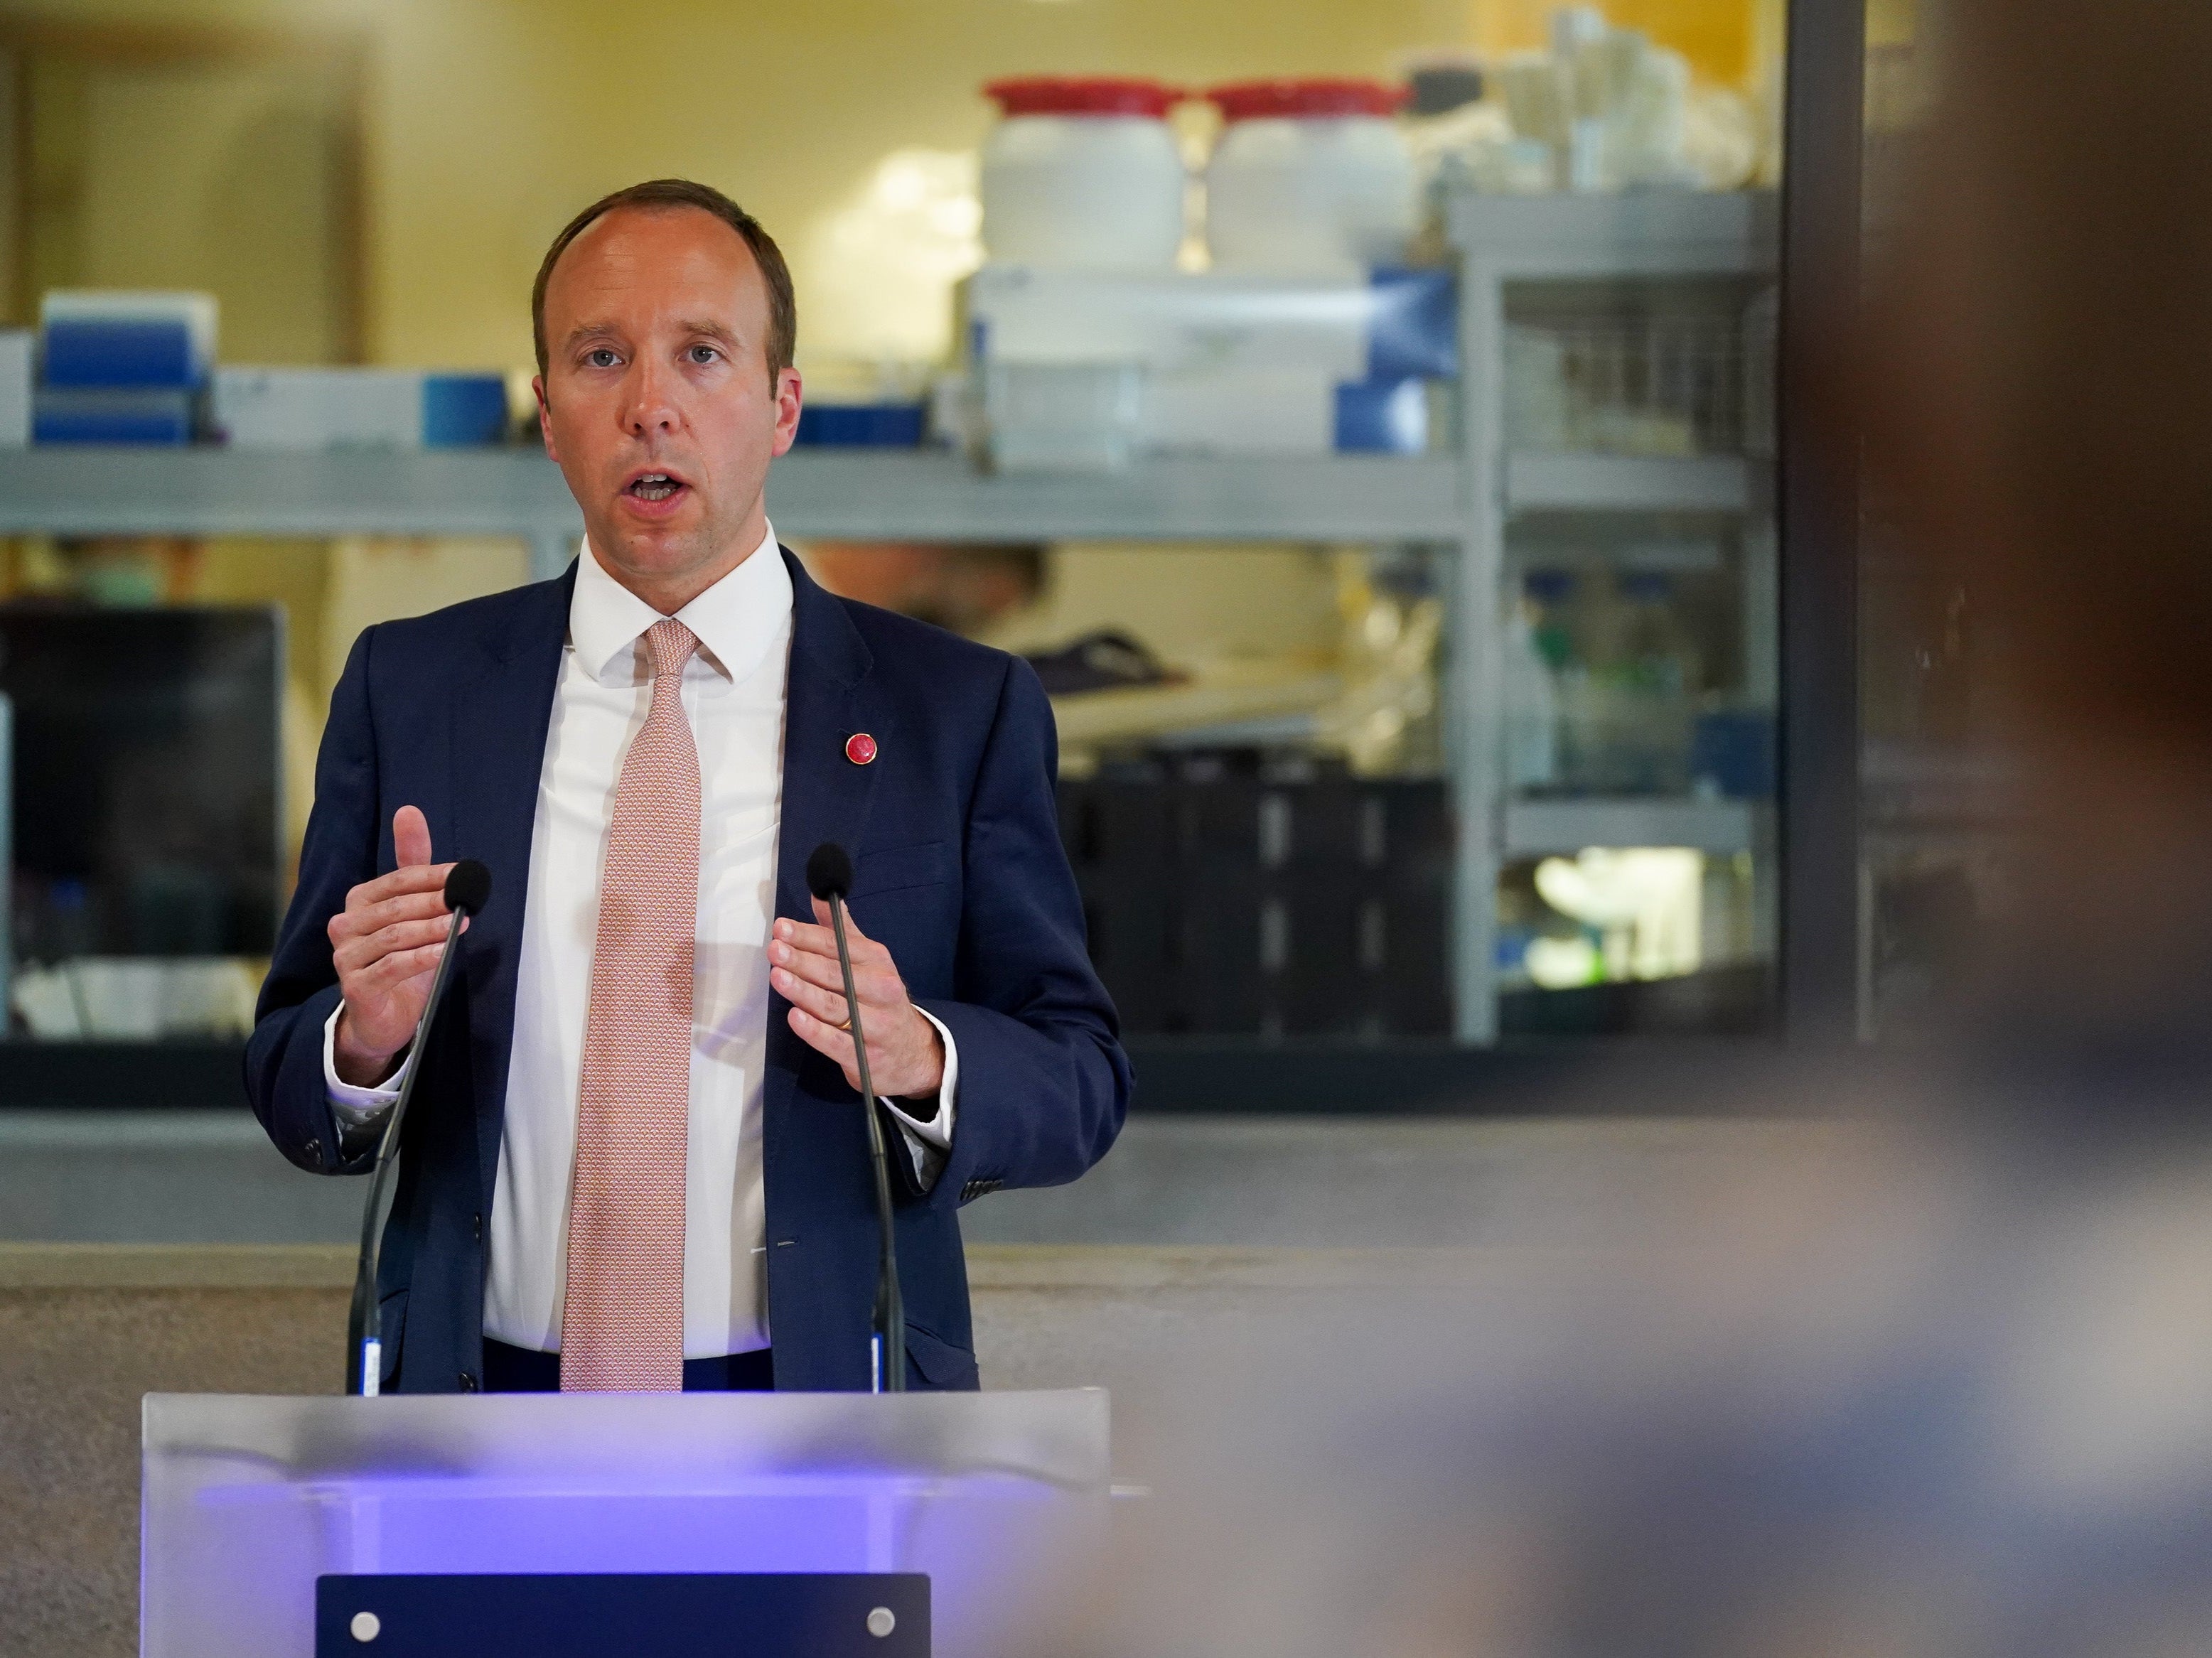 Health secretary Matt Hancock delivered a speech at the Jenner Institute in Oxford on Wednesday afternoon